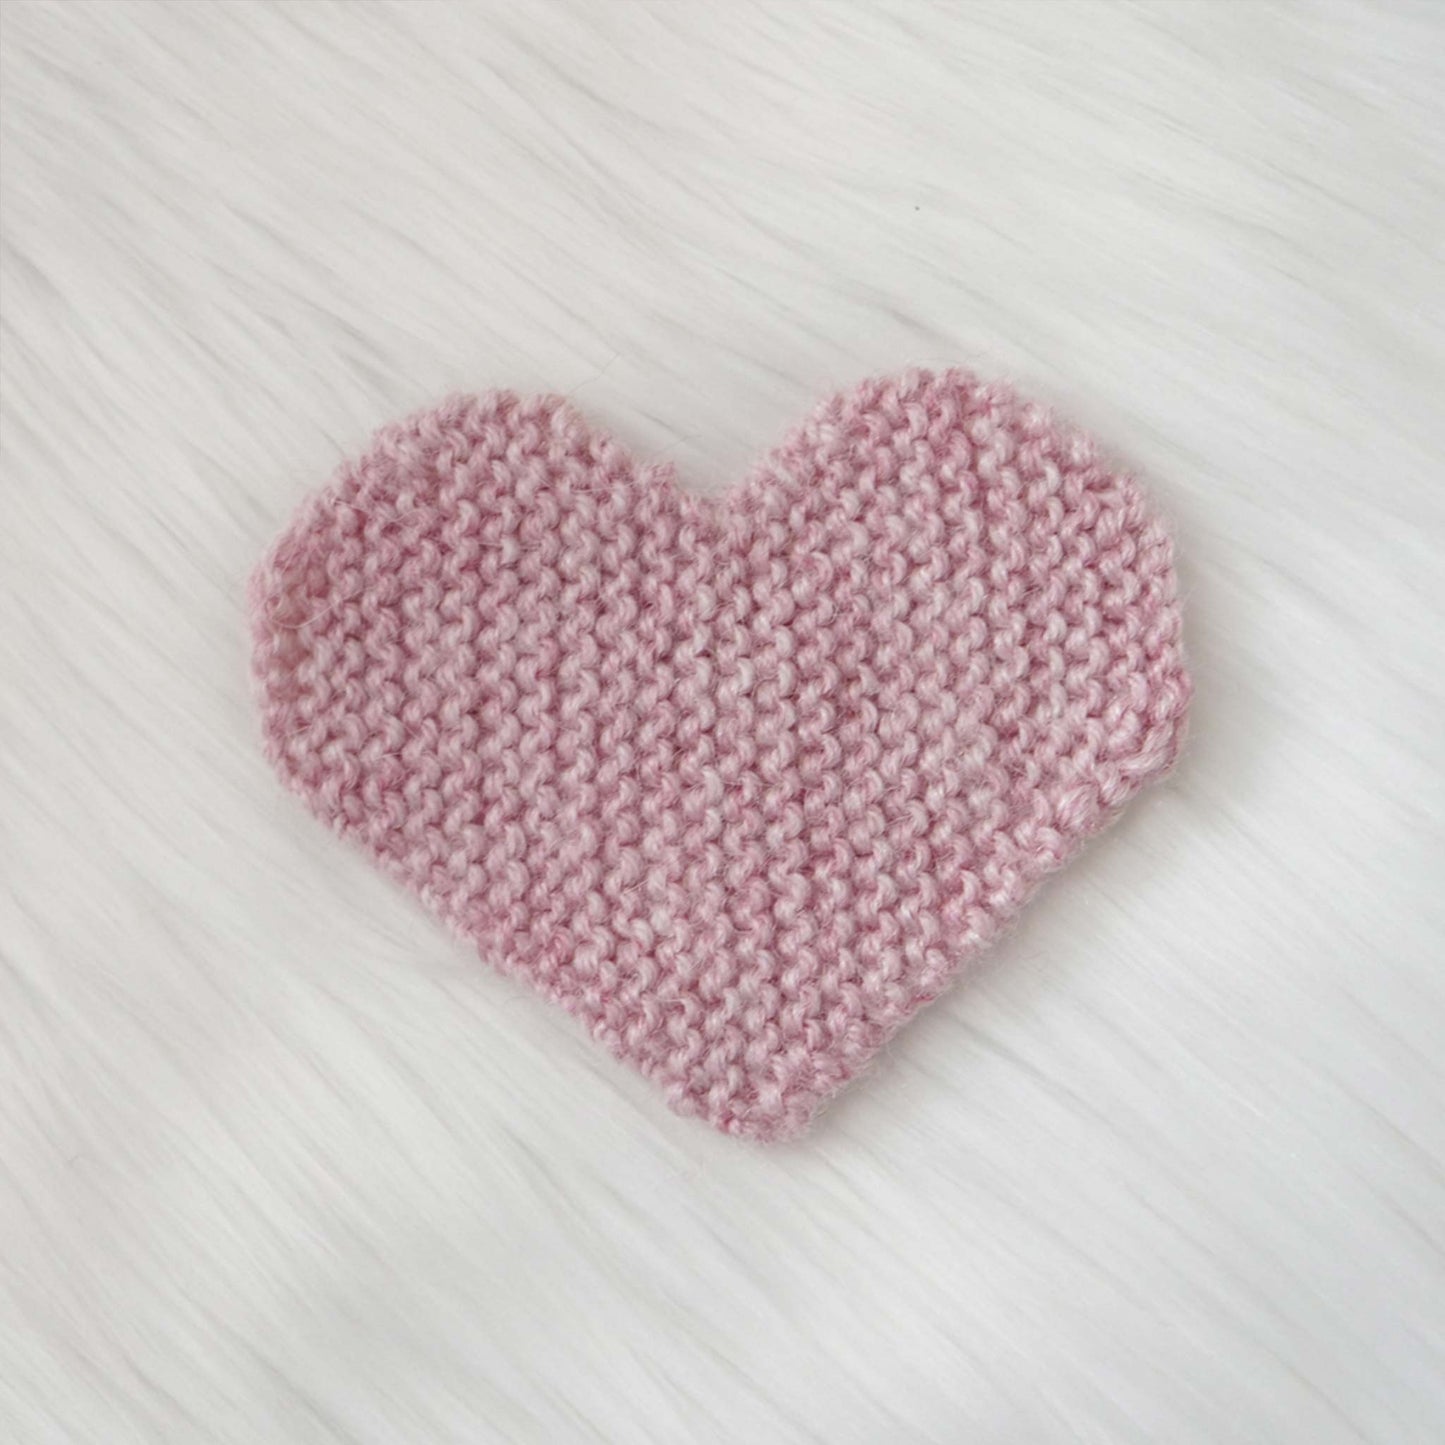 Knitted Heart Patch PDF